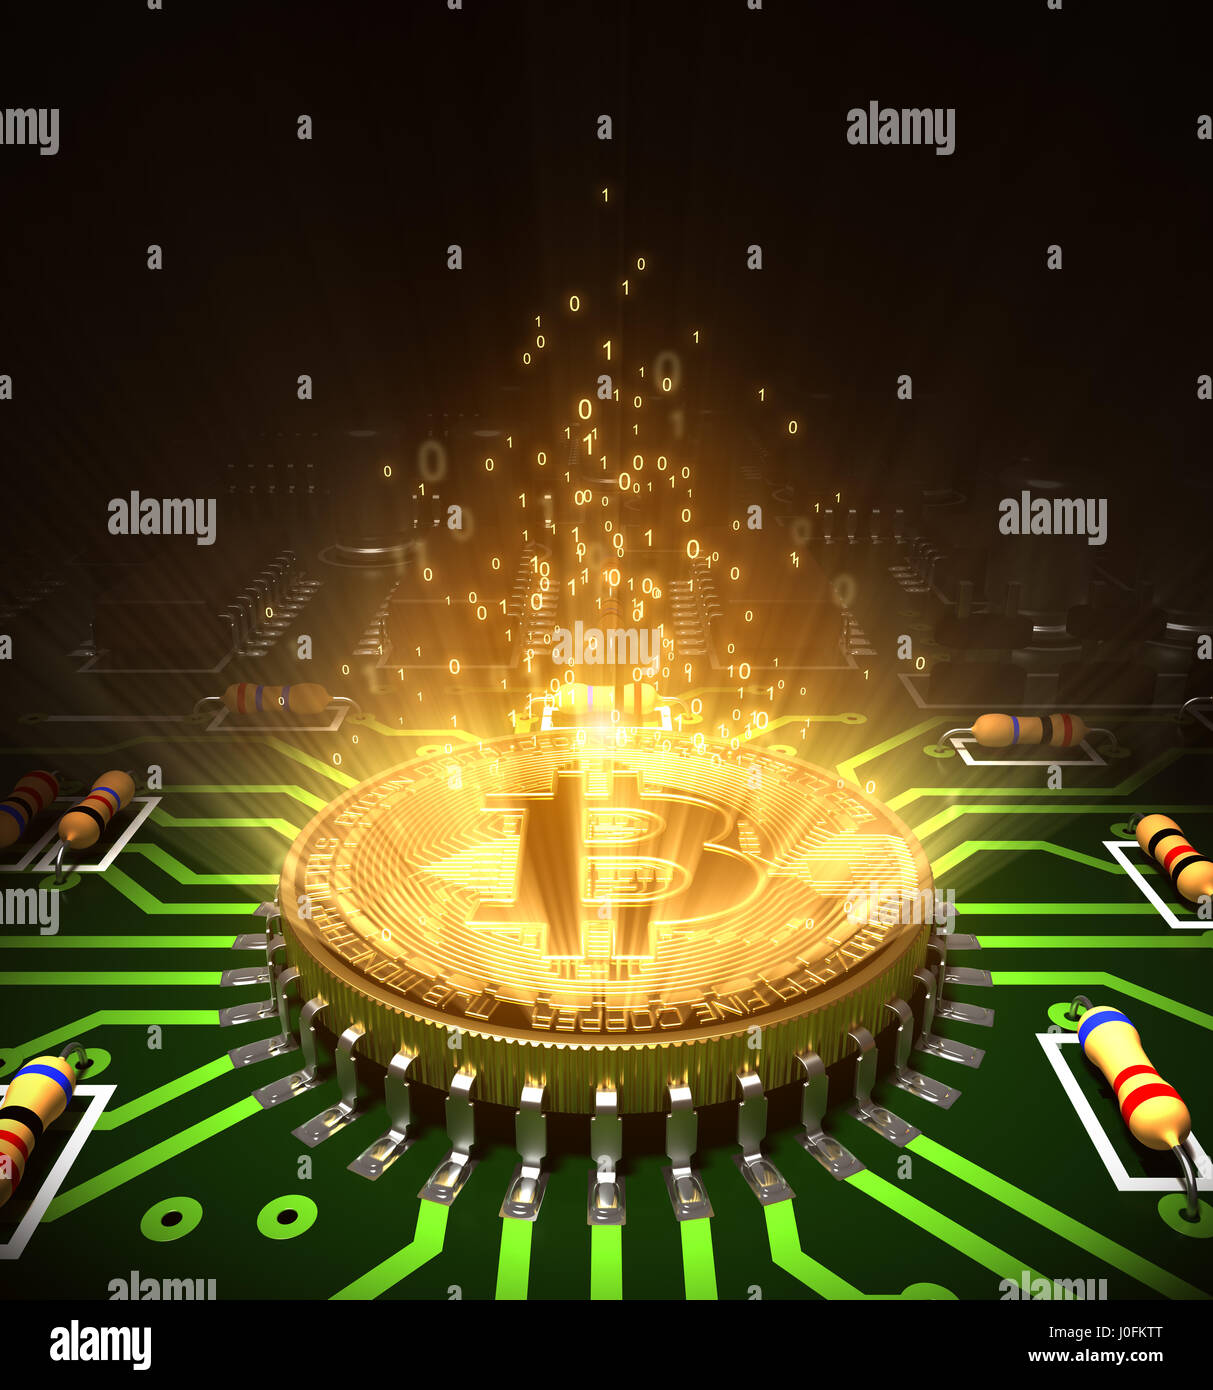 Concept Of Bitcoin Like A Computer Processor With Magic Digital Light On Motherboard. 3D Illustration. Stock Photo